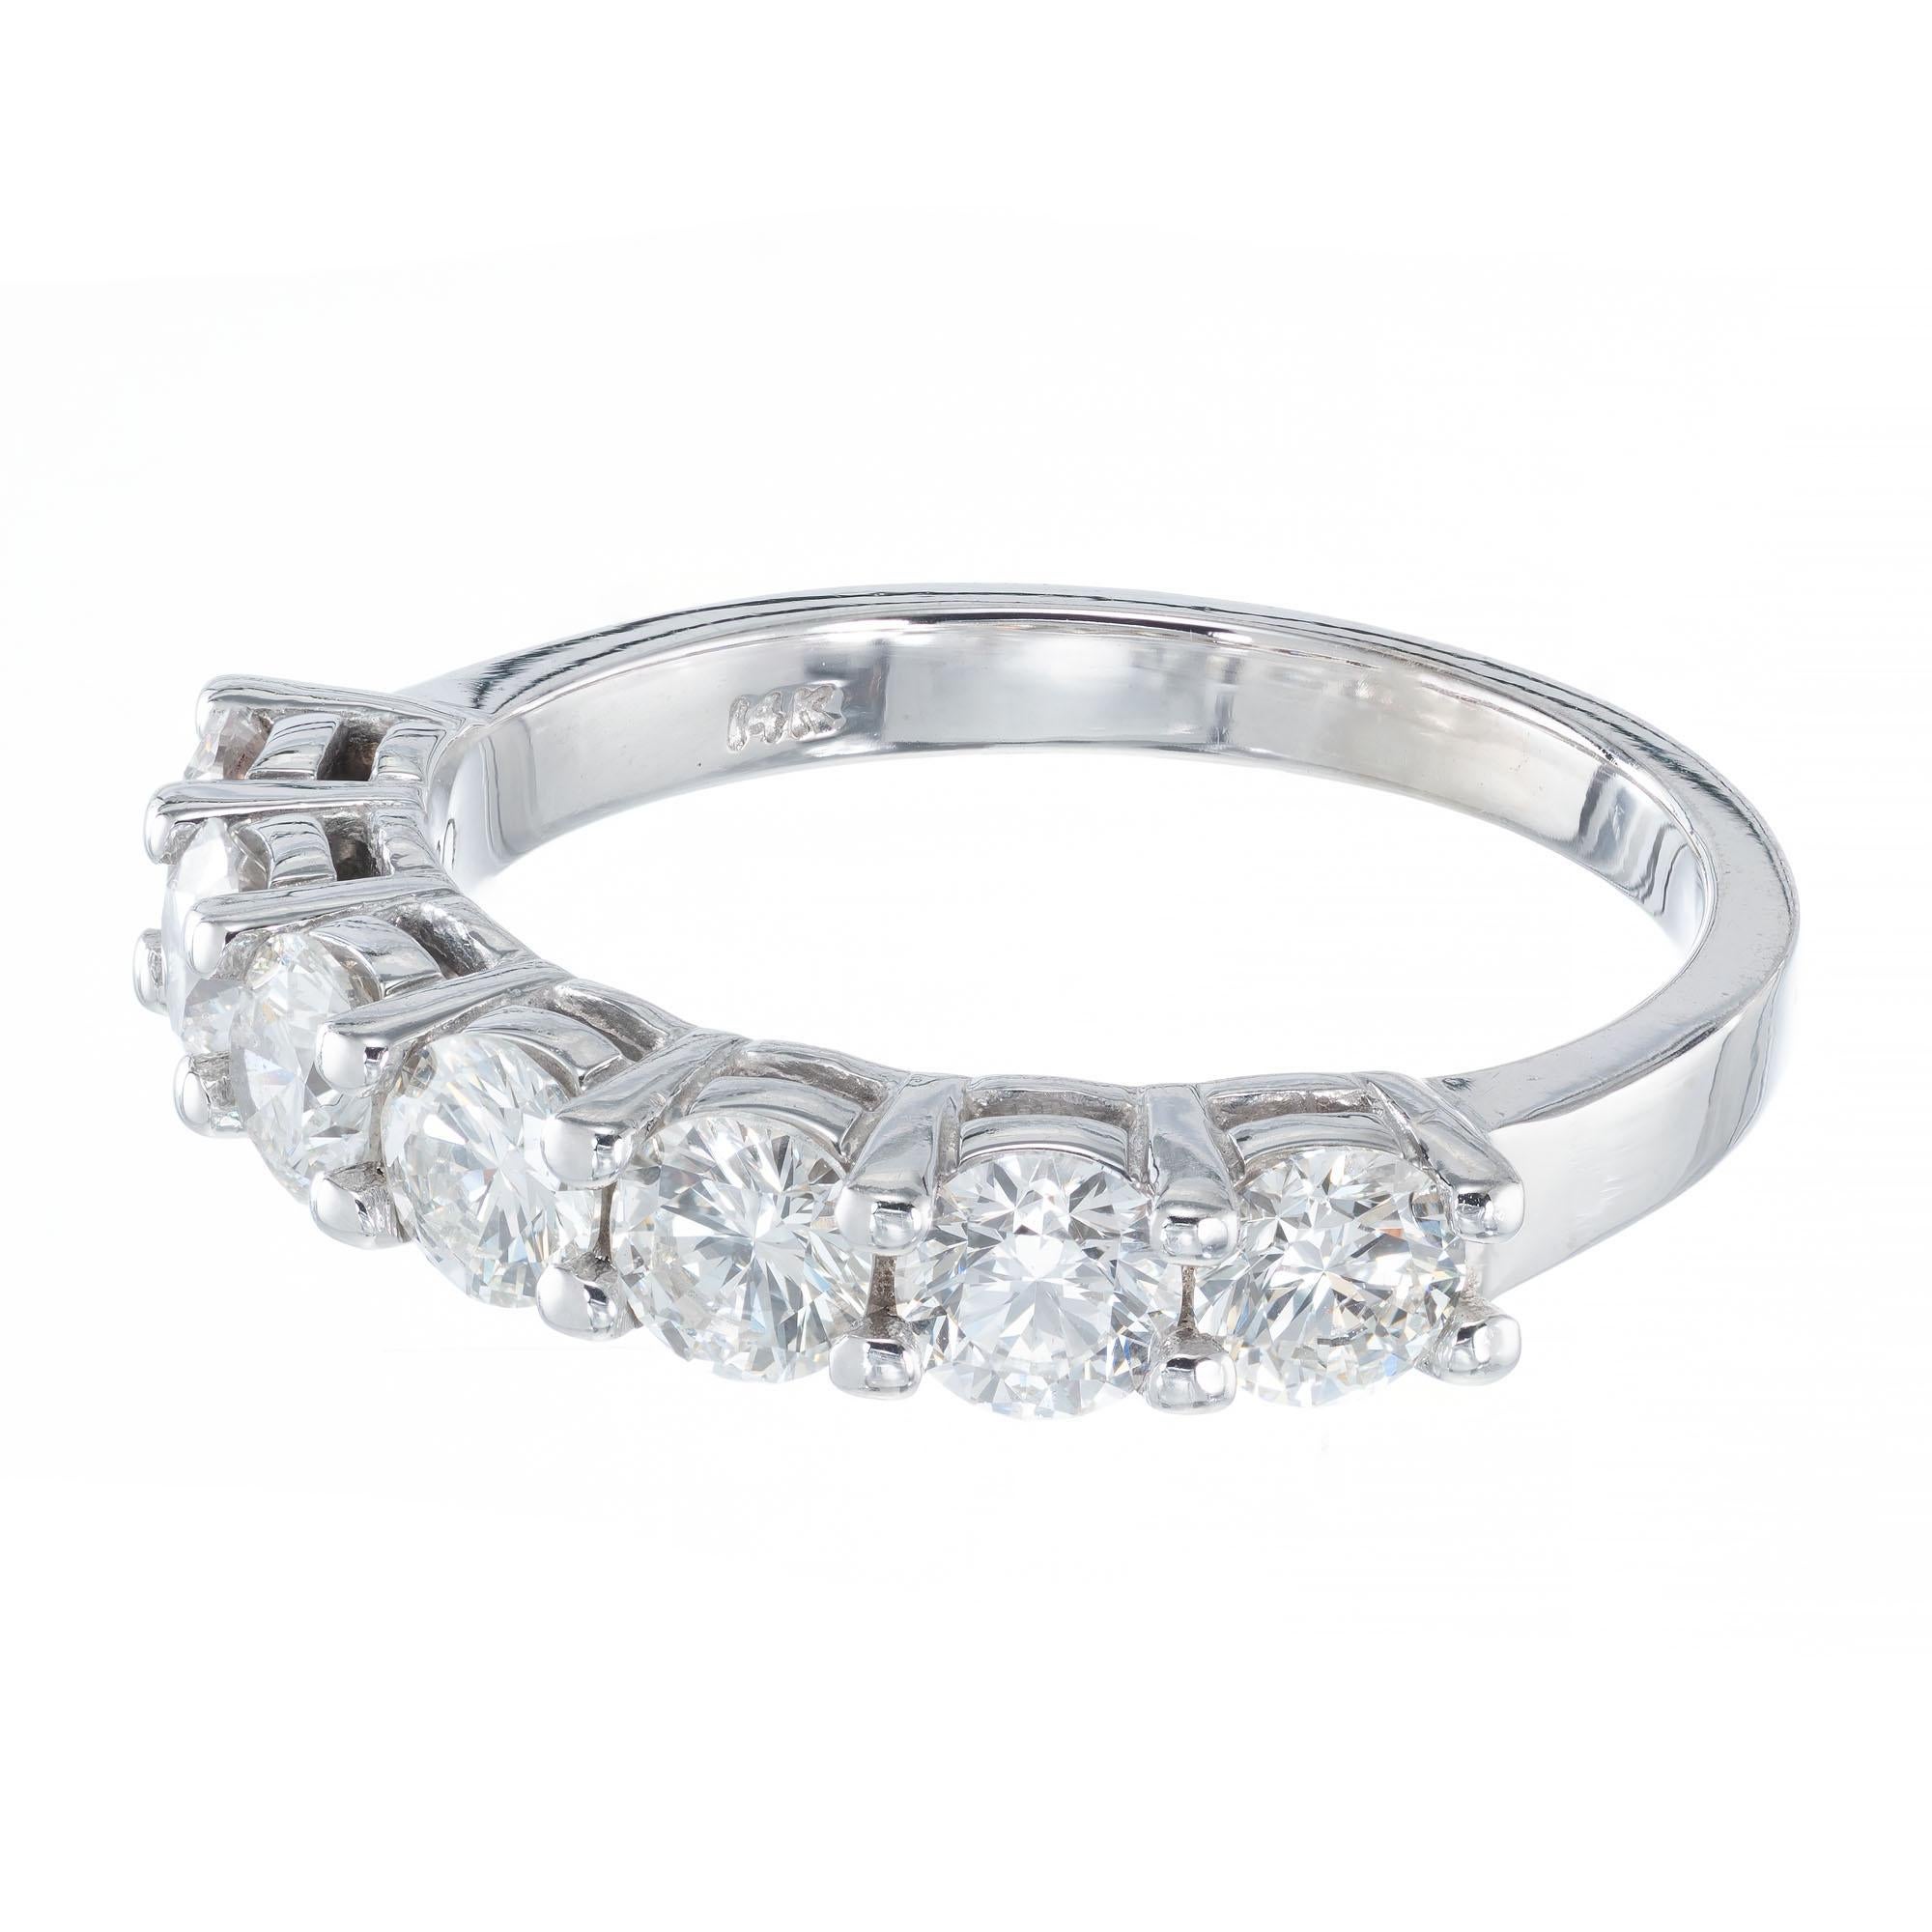 7 round Diamond wedding band in a classic custom prong platinum setting from the Peter Suchy Workshop.

7 round brilliant cut diamonds G-H, VS-SI, approx. 1.20cts
Size 6.5 and sizable 
Platinum 
Stamped: PLAT
4.6 grams
Width at top: 3.0mm
Height at